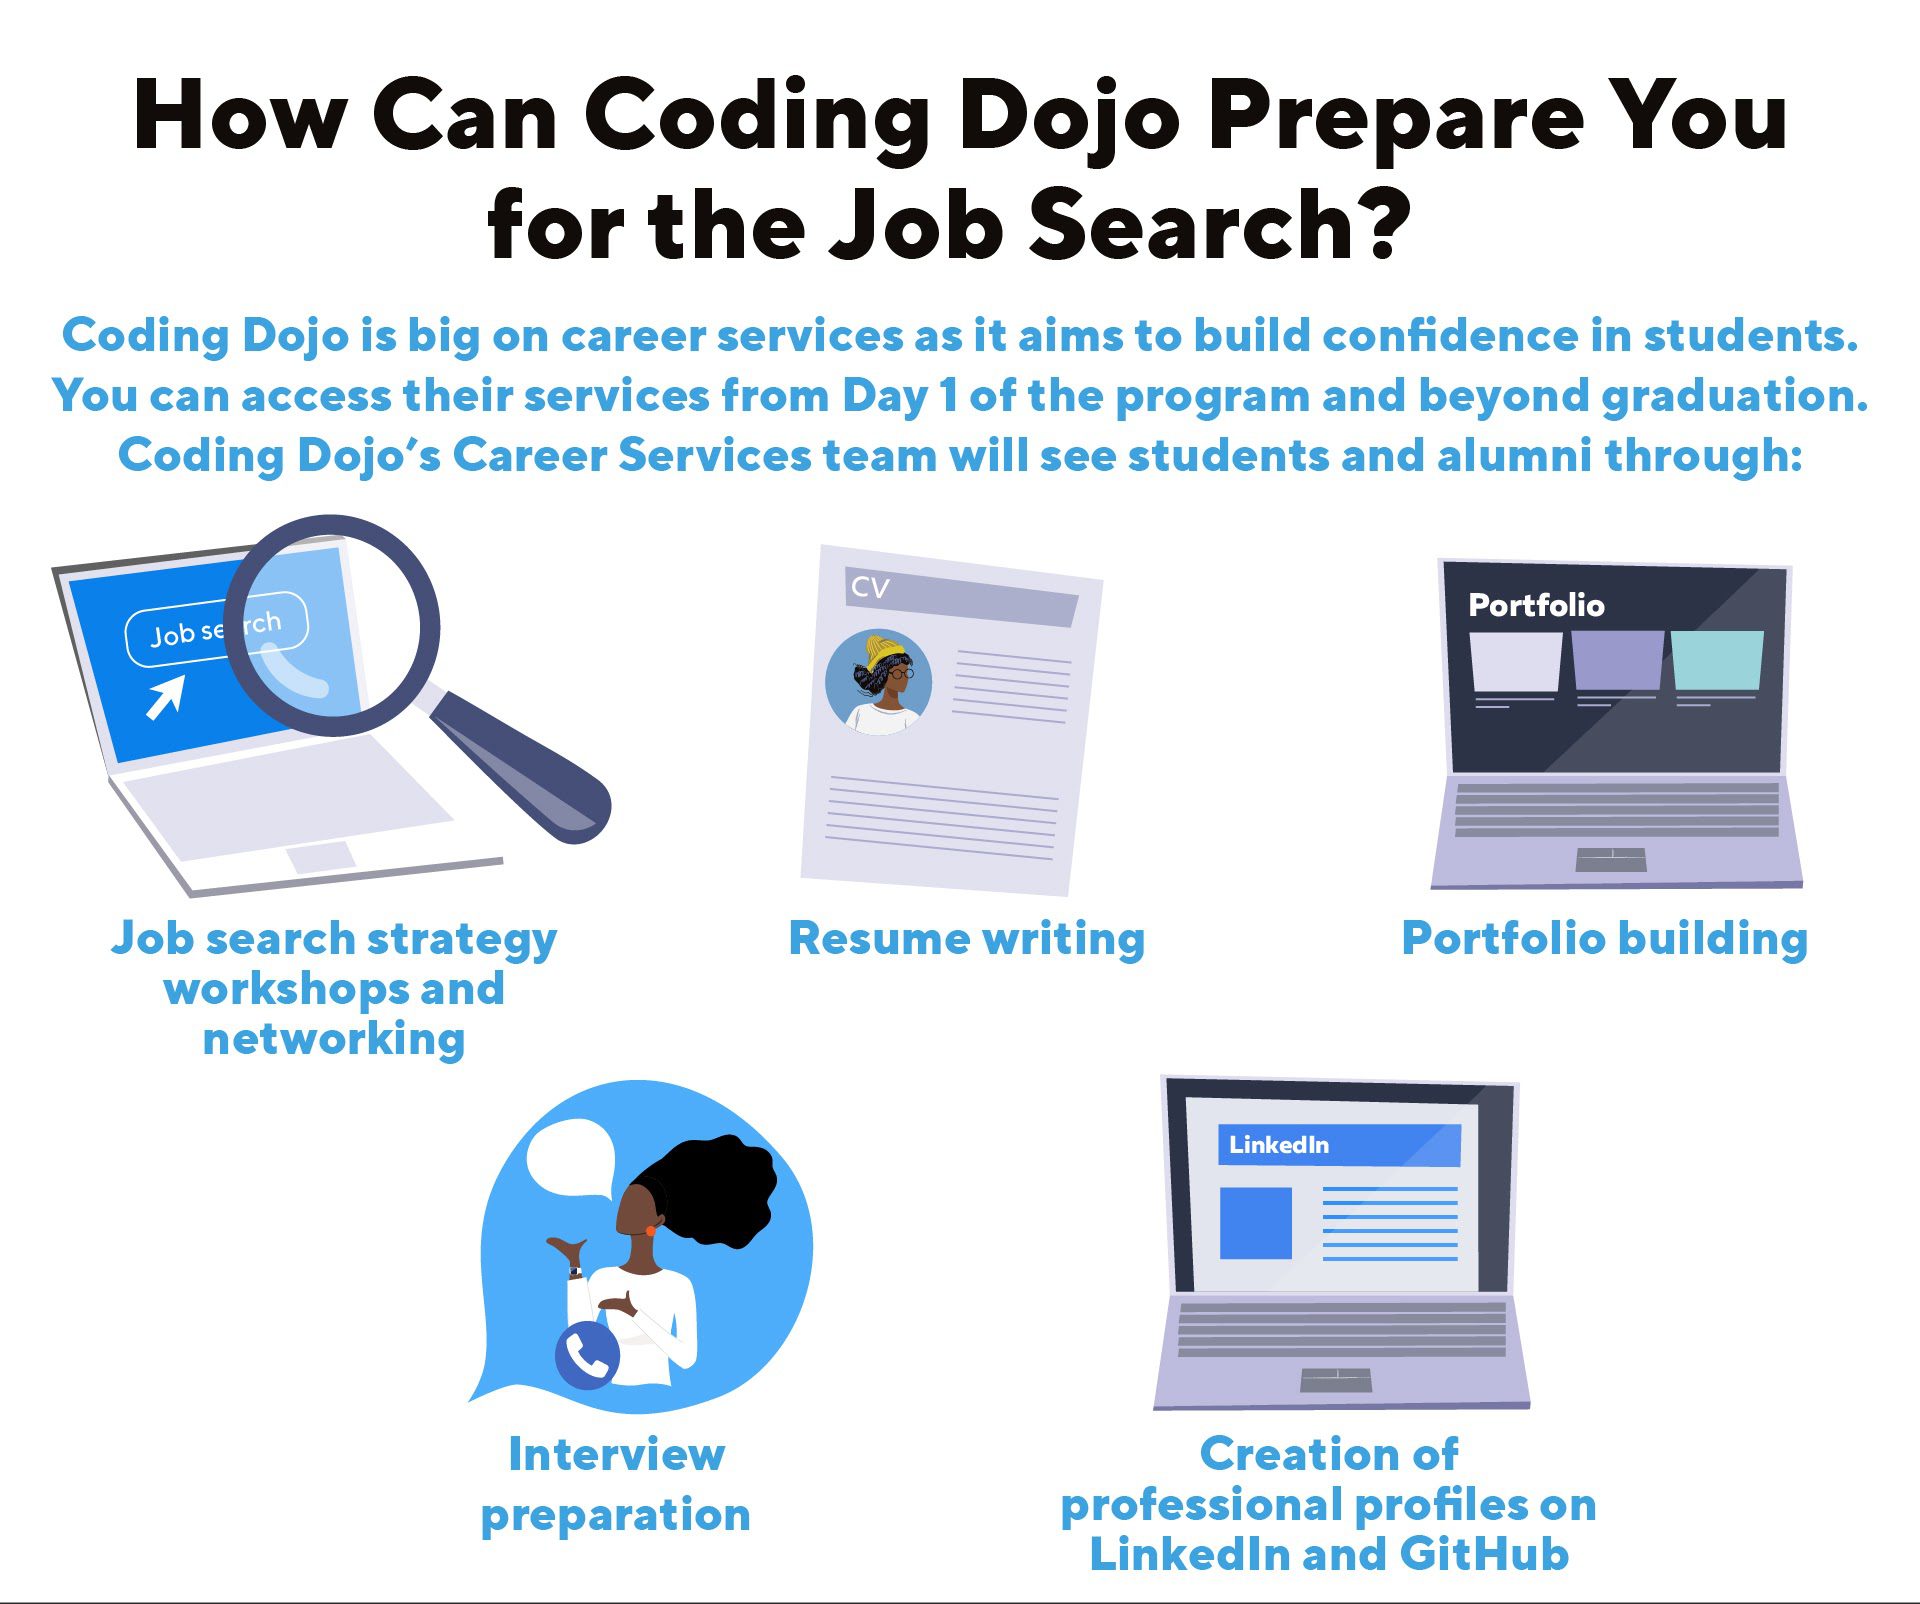 An infographic highlighting the key career services offered at Coding Dojo